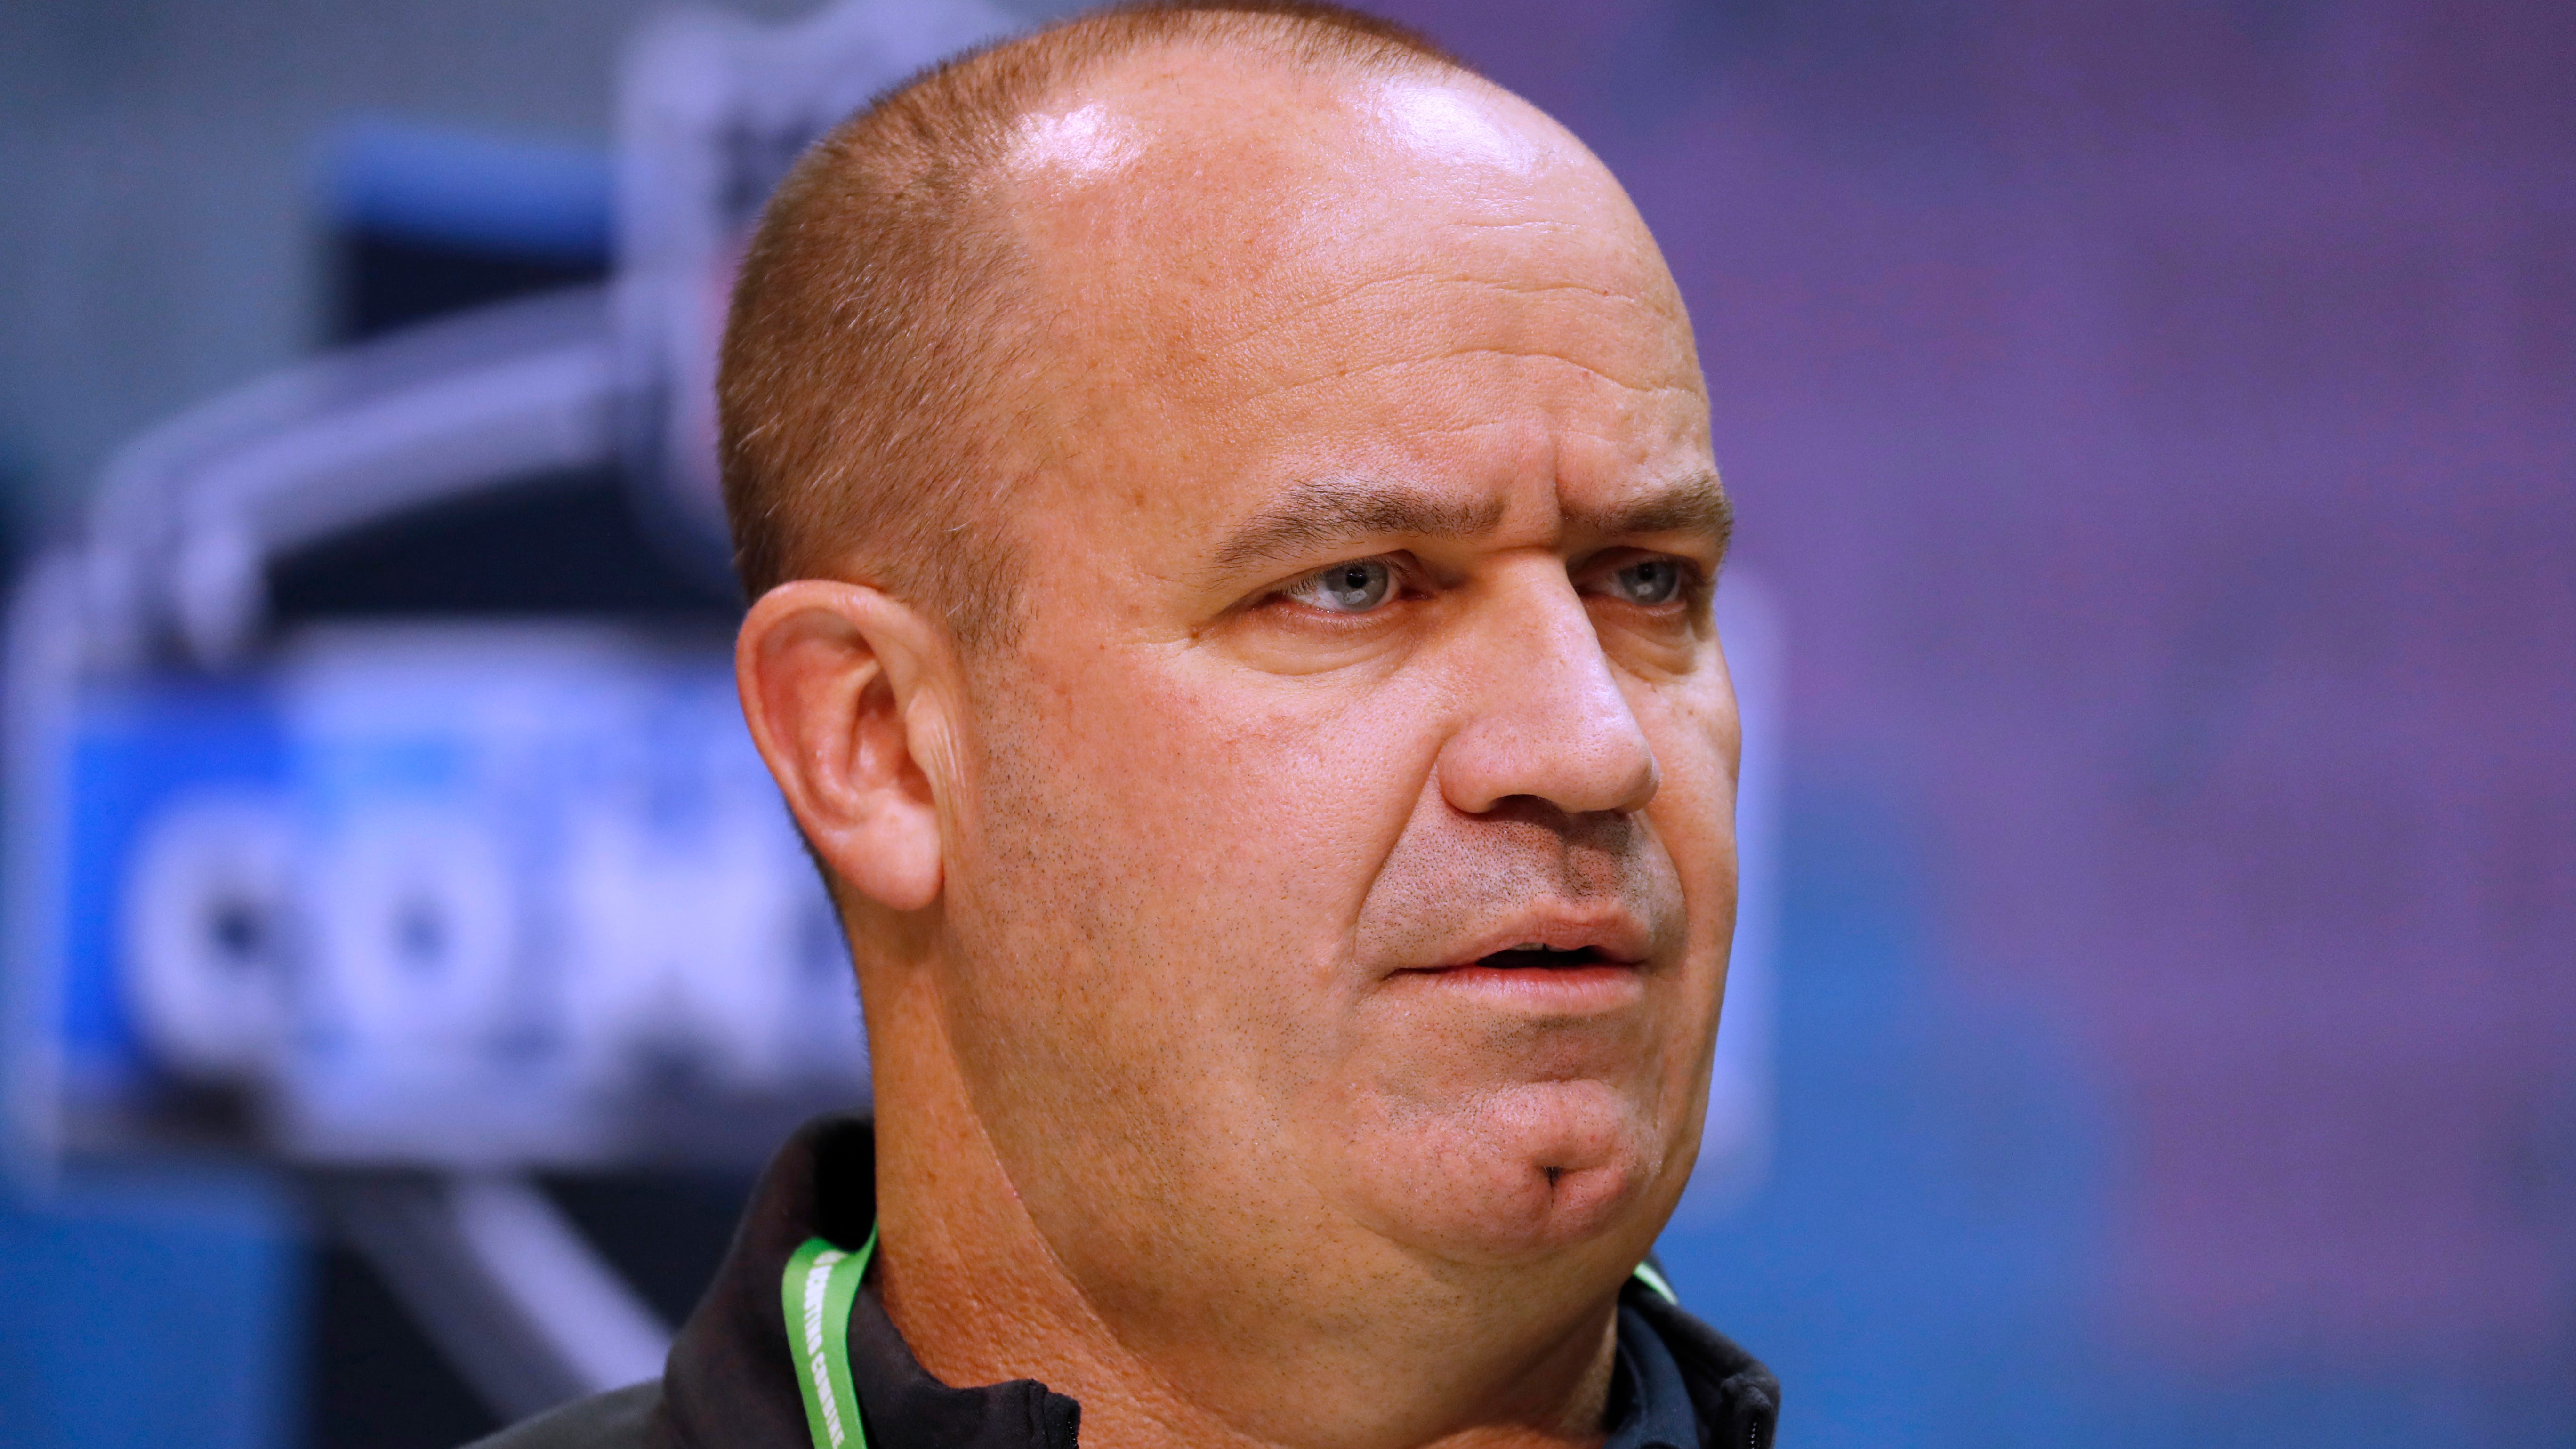 Feb 25, 2020; Indianapolis, Indiana, USA; Houston Texans coach Bill O'Brien speaks to the media during the NFL Combine at the Indiana Convention Center. Mandatory Credit: Brian Spurlock-USA TODAY Sports